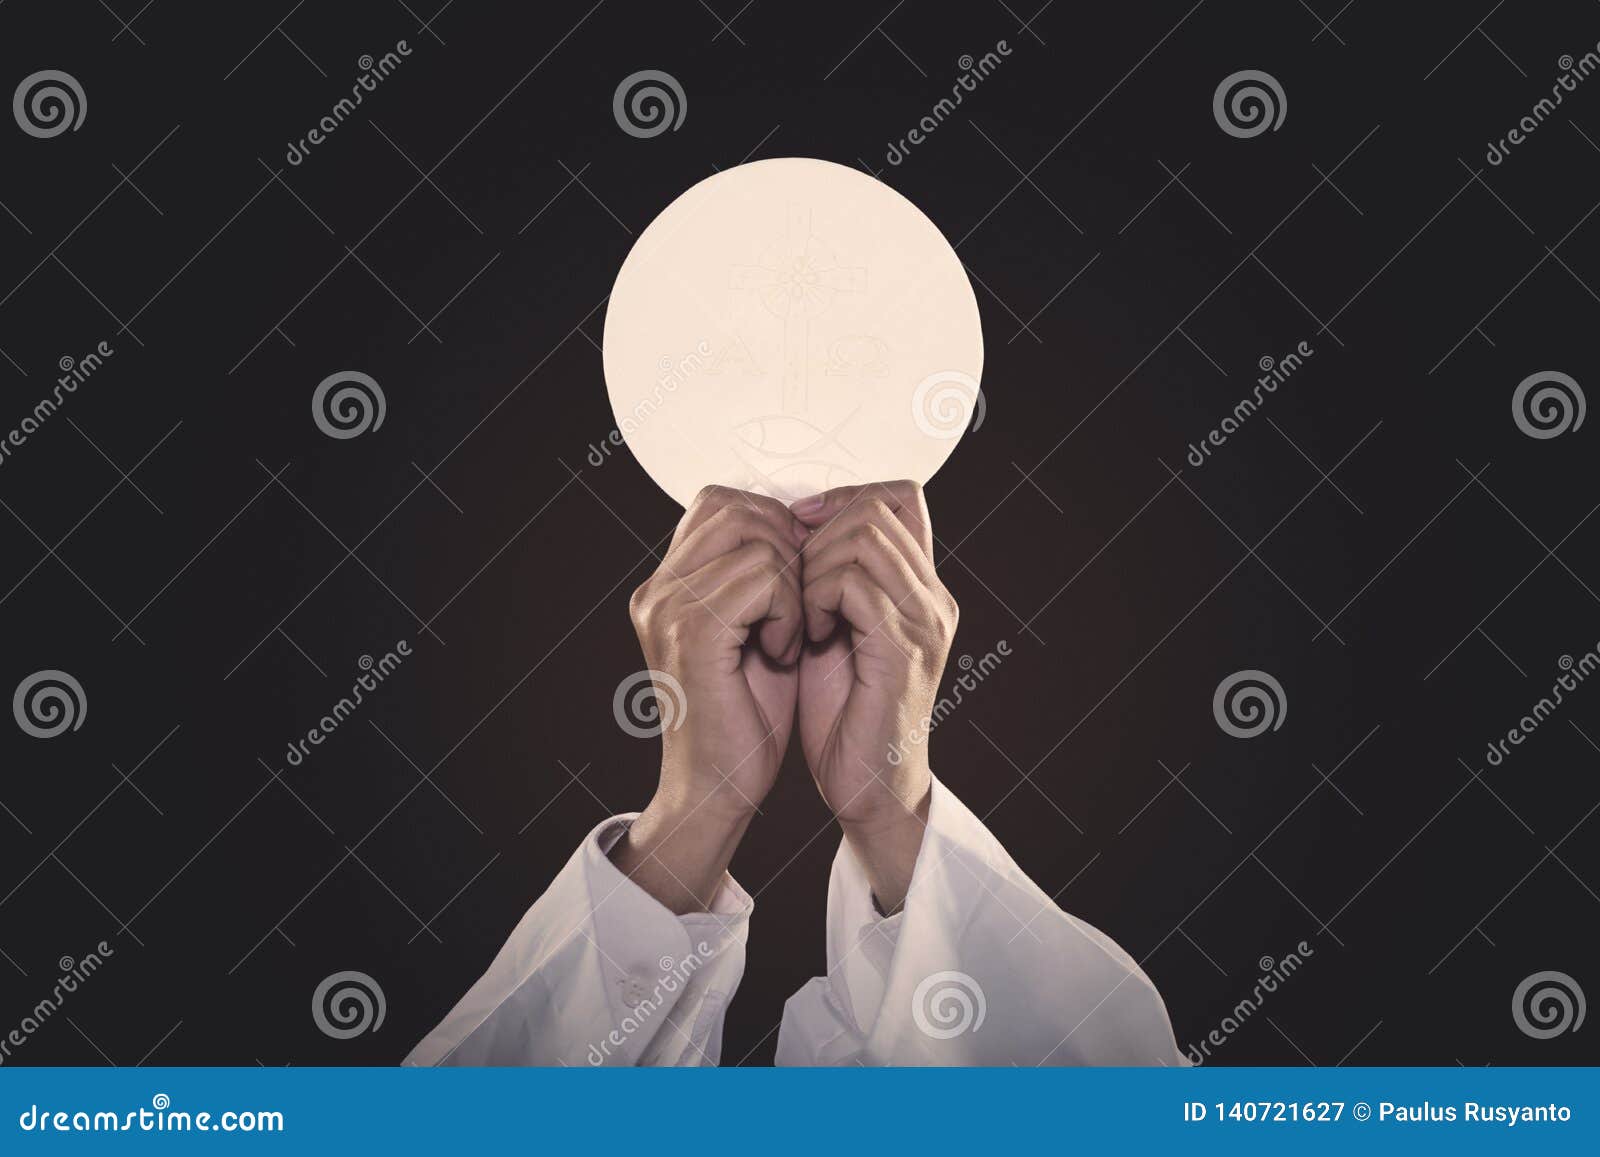 priest hands lifting a communion bread